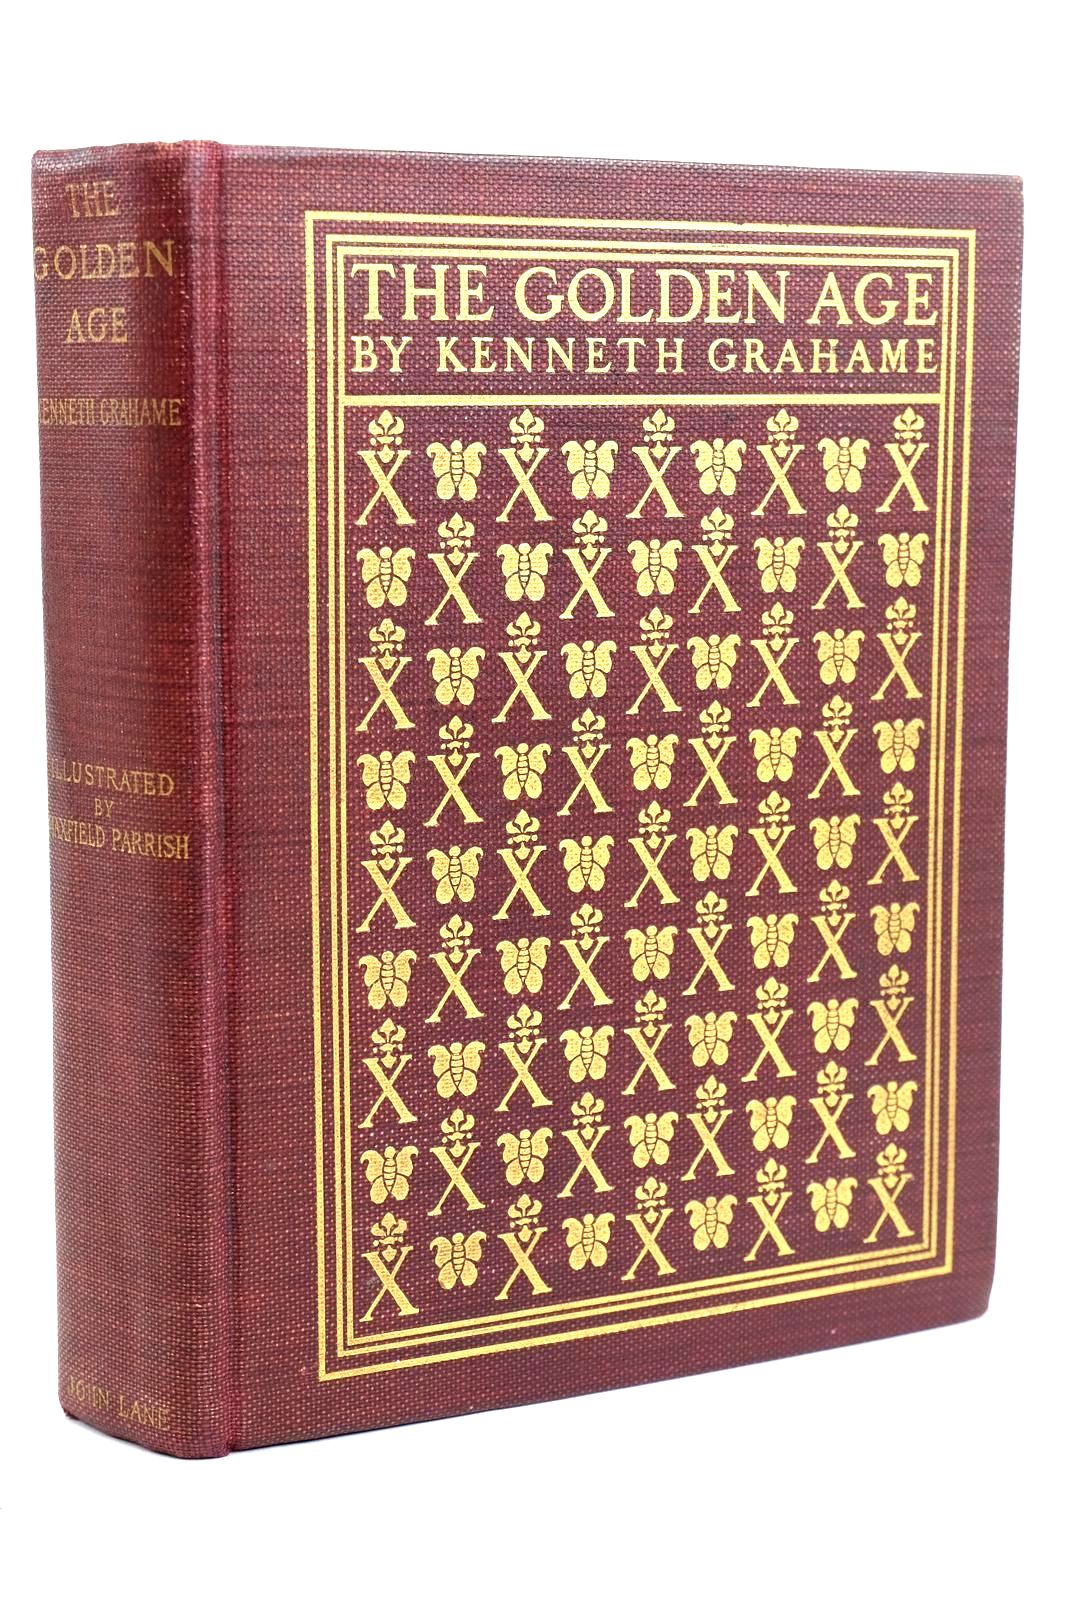 Photo of THE GOLDEN AGE- Stock Number: 1320460